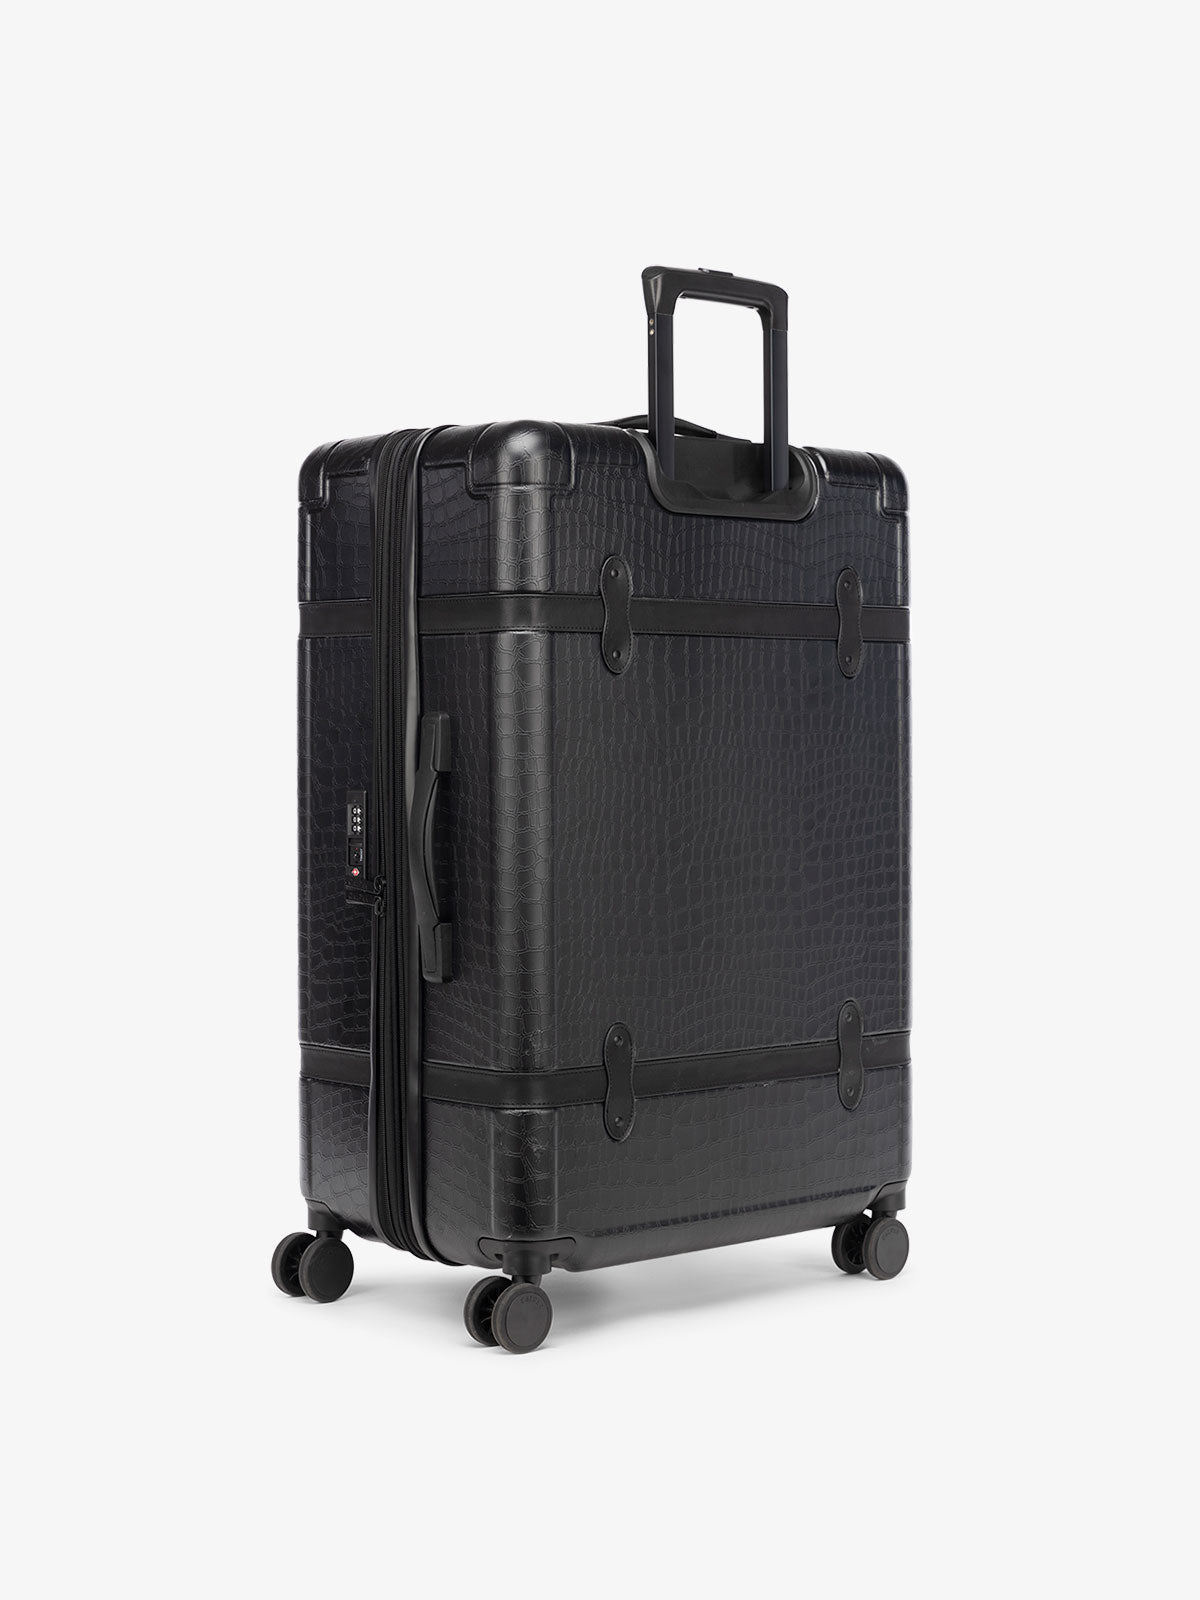 CALPAK TRNK 29 inch checked black luggage with TSA approved locks